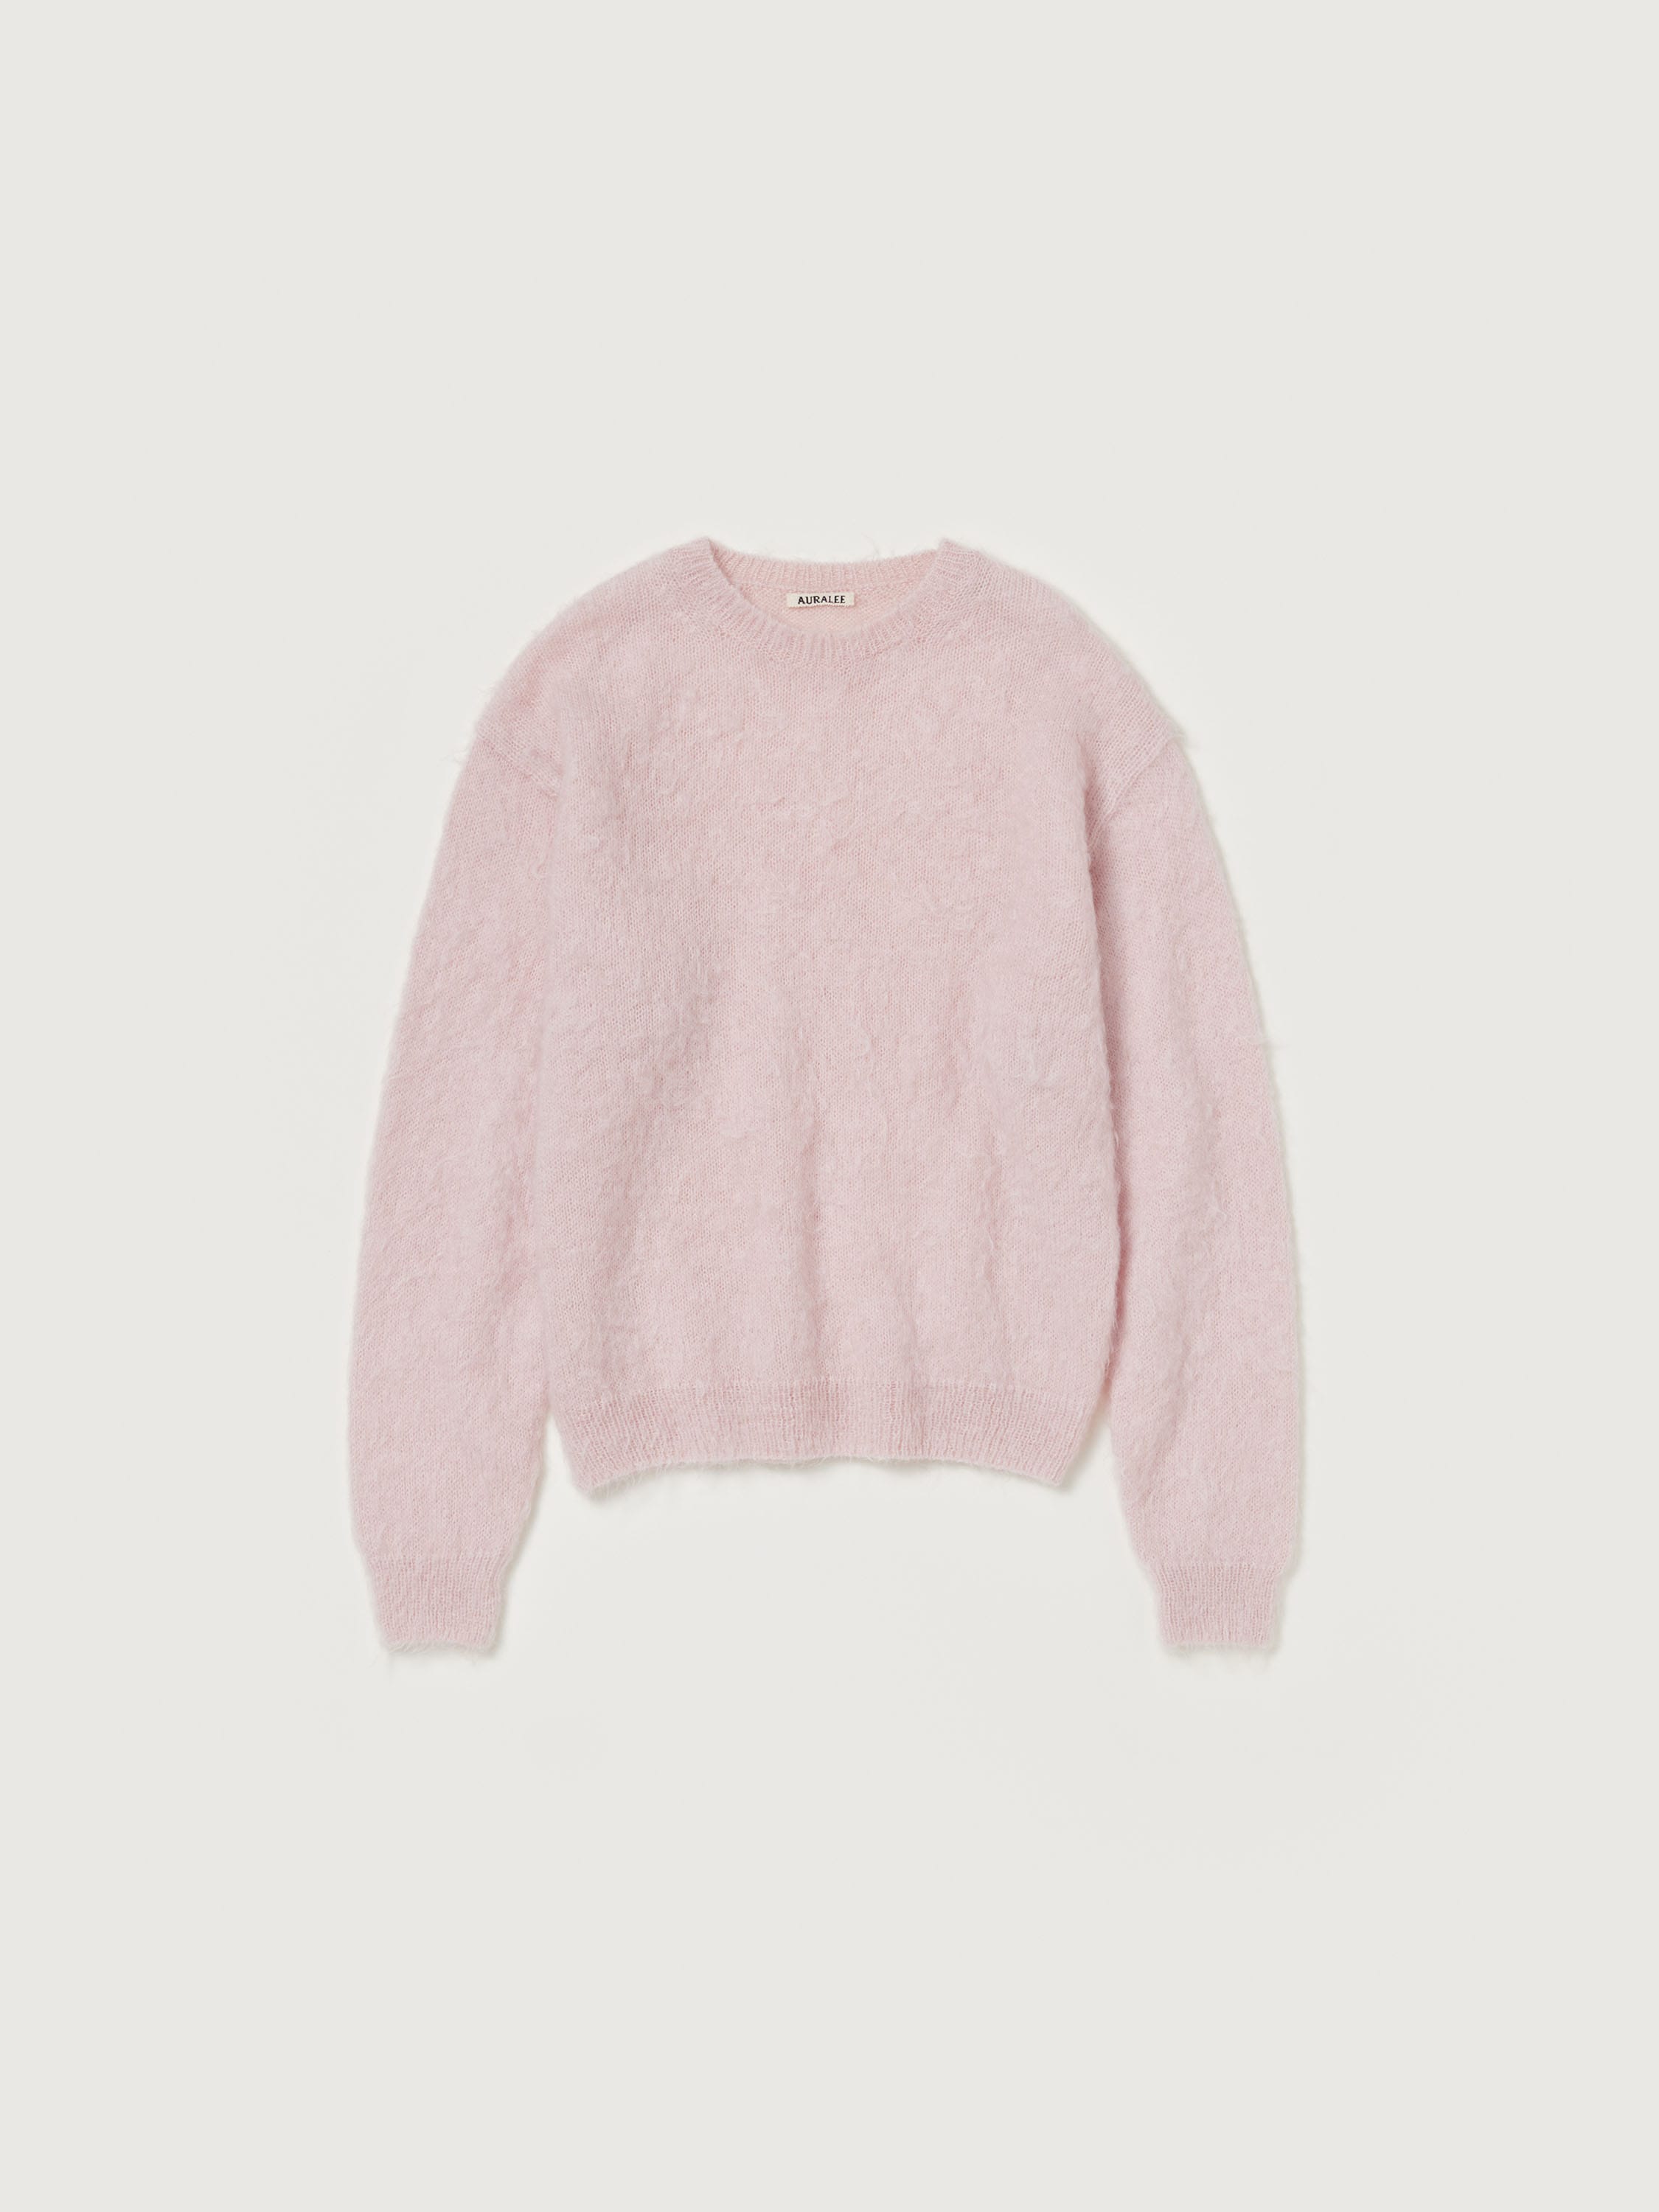 BRUSHED SUPER KID MOHAIR KNIT P/O 詳細画像 LIGHT PINK 1